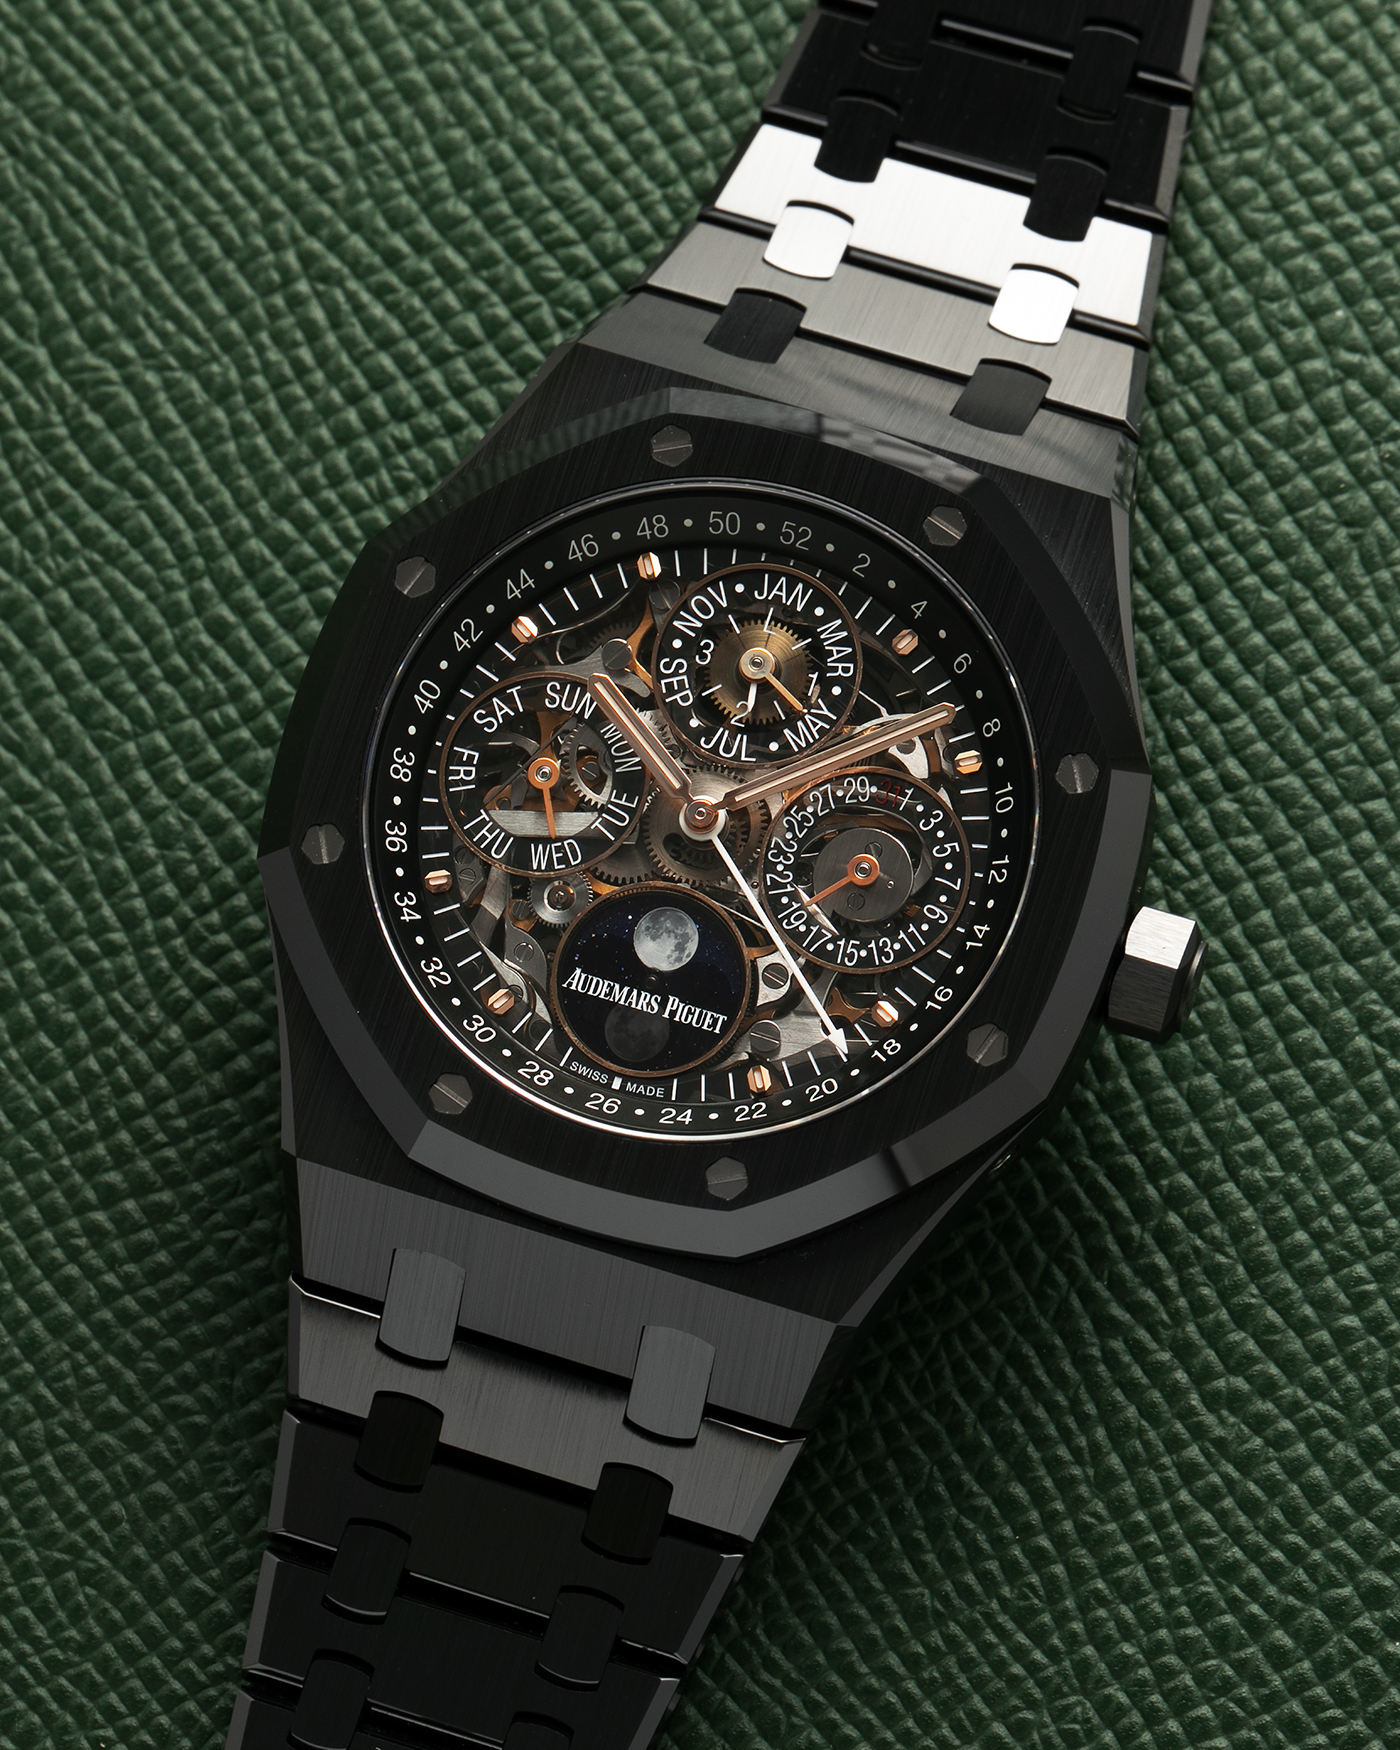 Brand: Audemars Piguet Year: 2021 Model: Royal Oak Perpetual Calendar Openworked, Boutique-only Edition Reference Number: 26585CE Material: Ceramic Movement: Audemars Piguet Cal. 5135, Self-Winding Case Dimensions: 41mm x 9.9mm Bracelet: Audemars Piguet Integrated Black Ceramic Bracelet with Signed Titanium Clasp